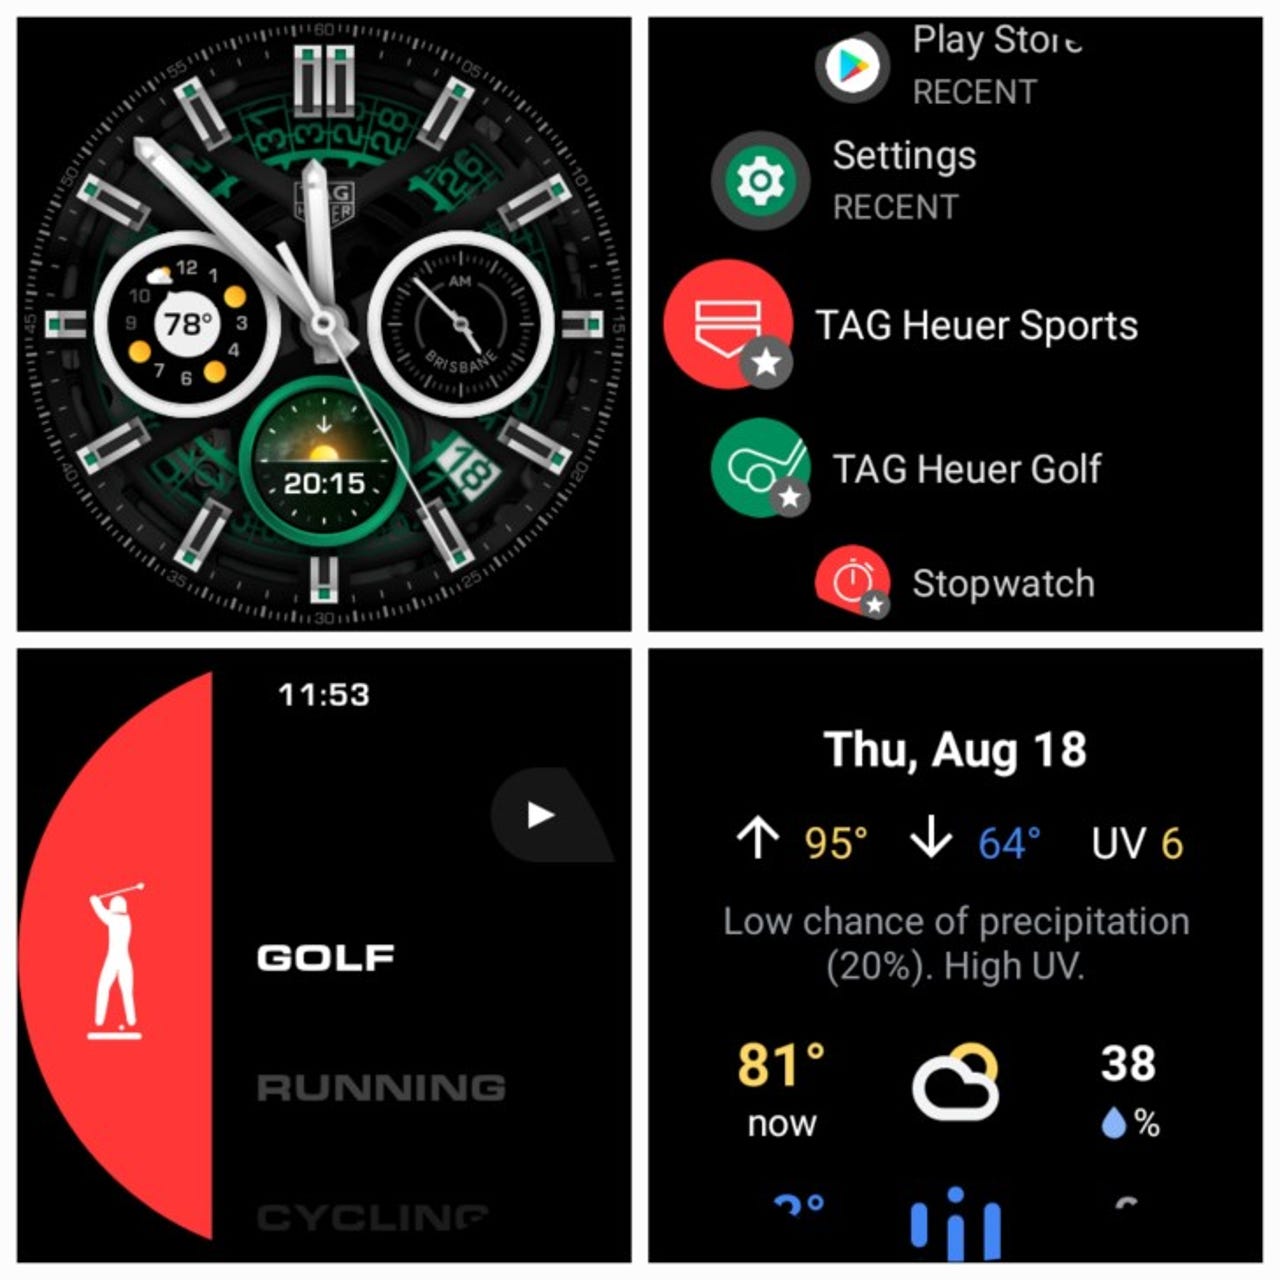 TAG Heuer's new luxury golf watch will take your game to the next level